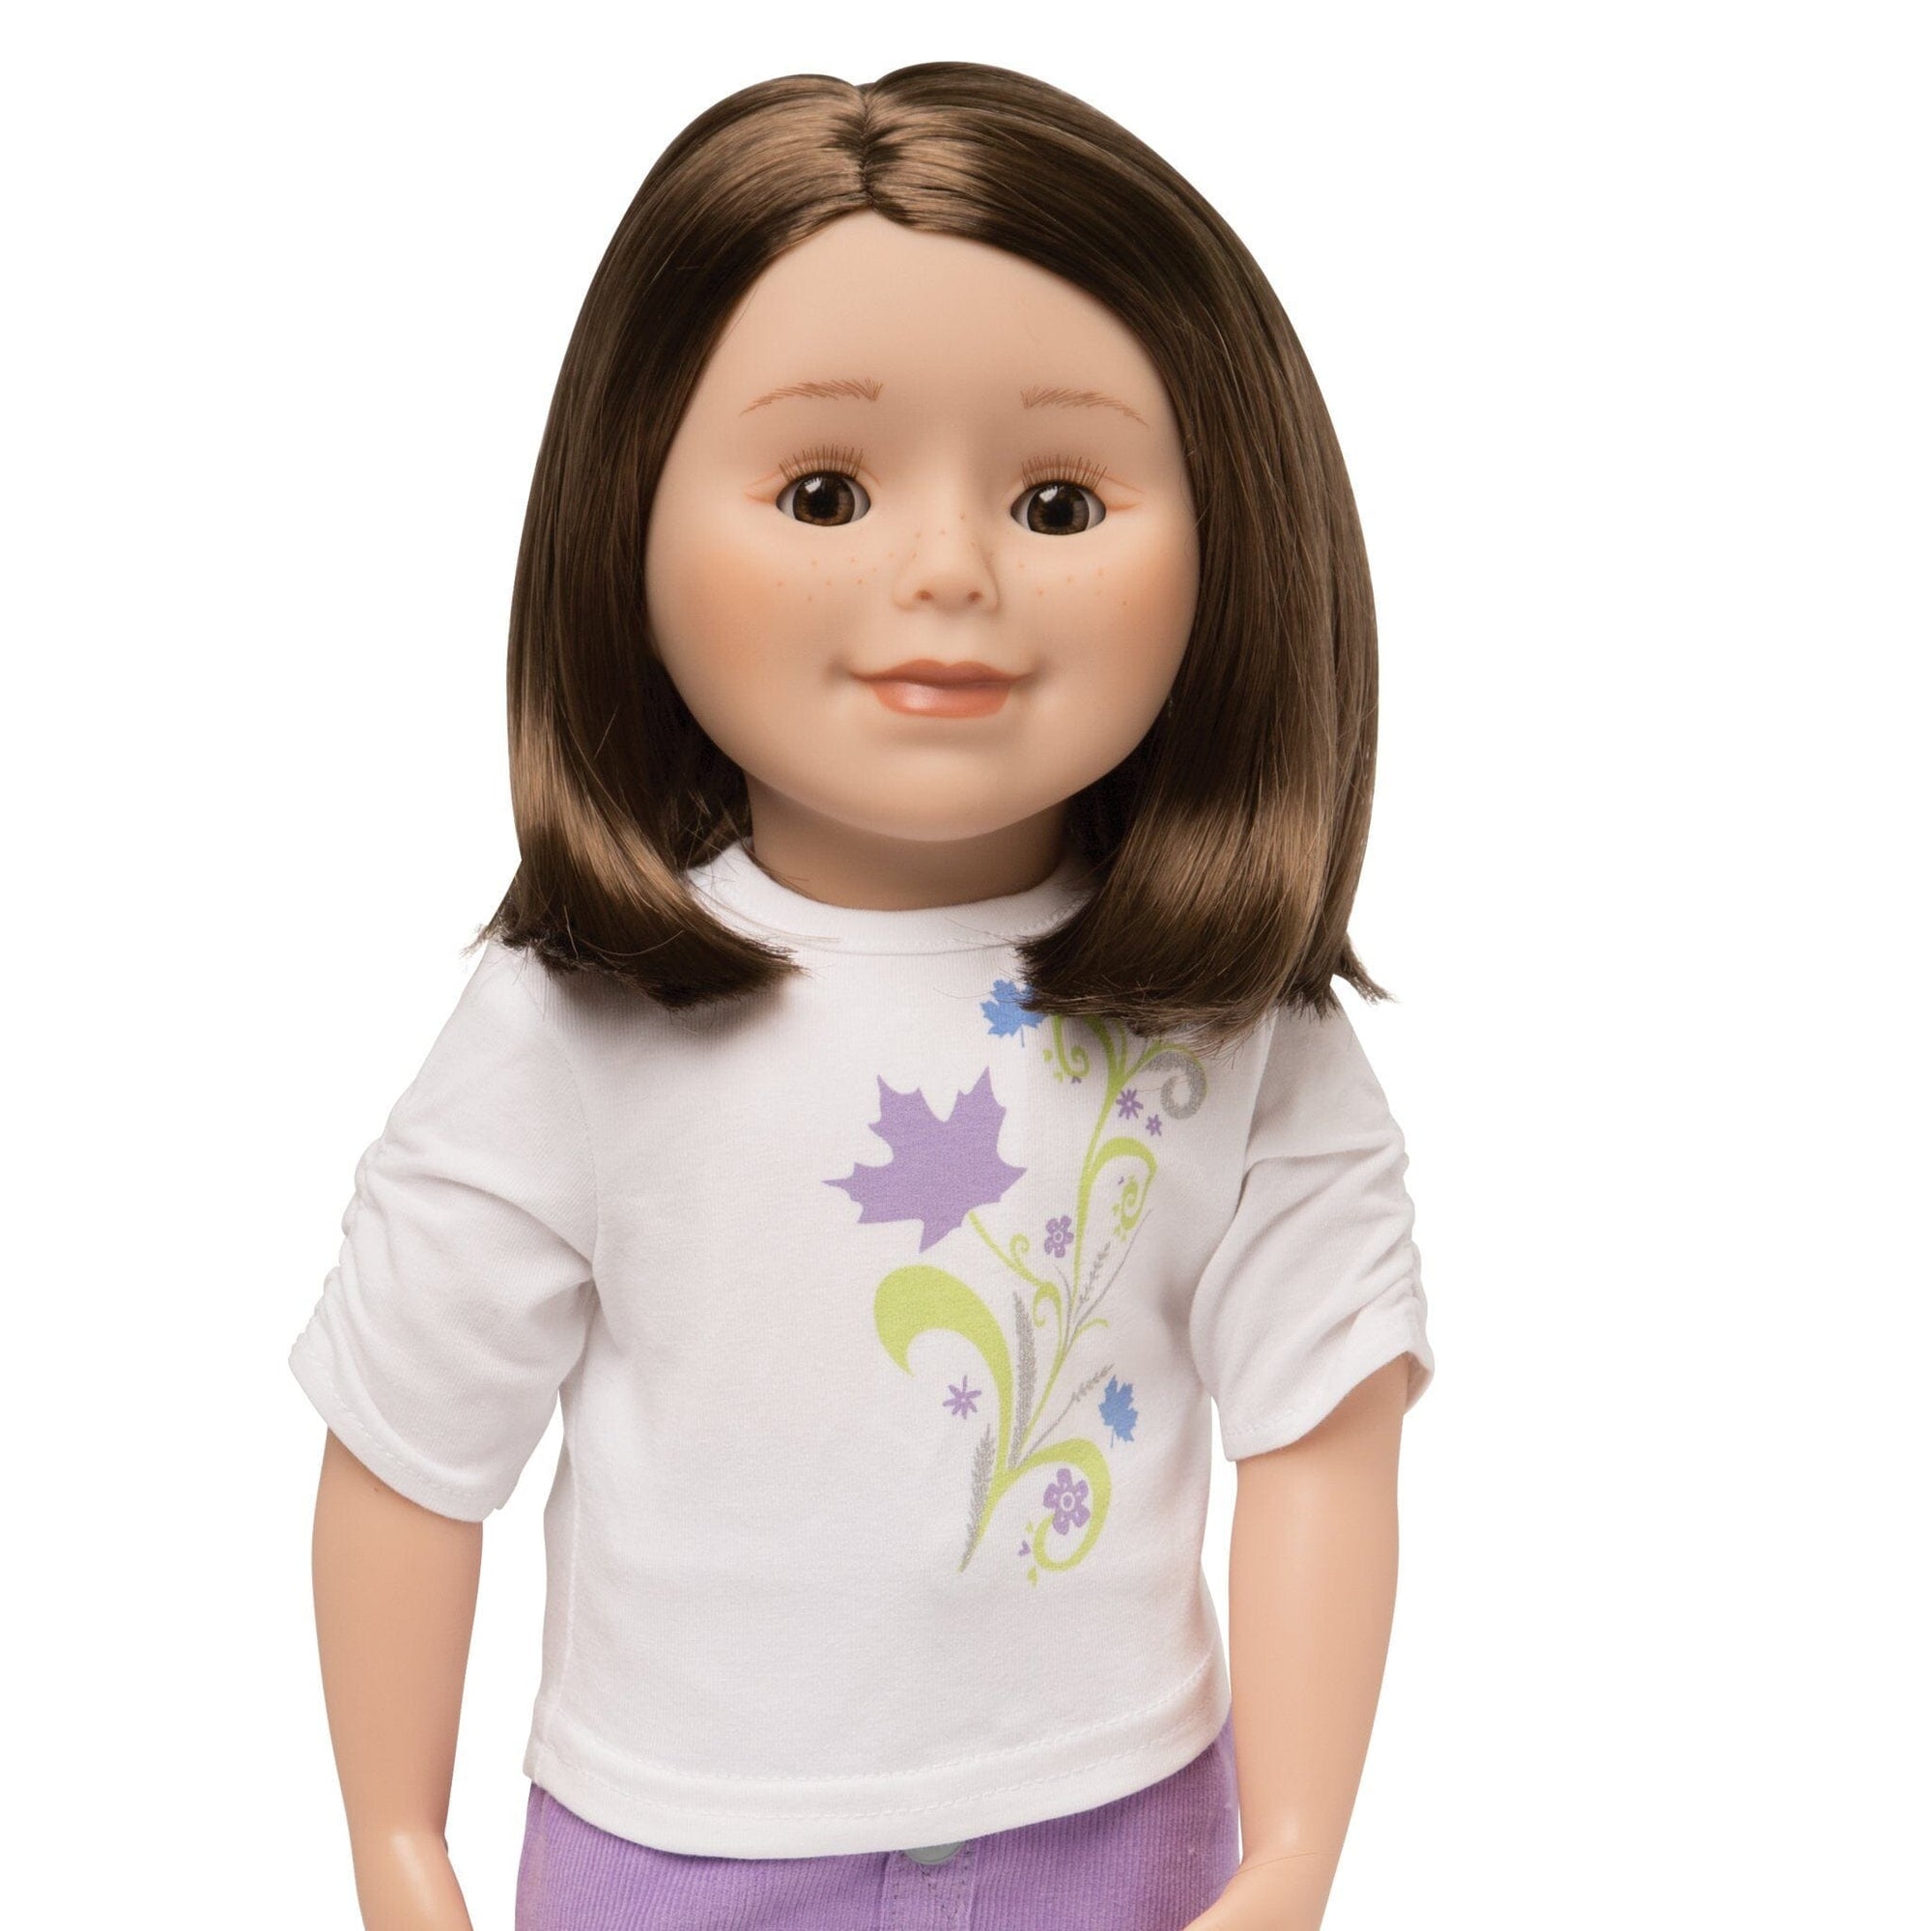 KMF25 Maplelea Friend 18 inch doll with shoulder-length brown hair, light skin, brown eyes and freckles